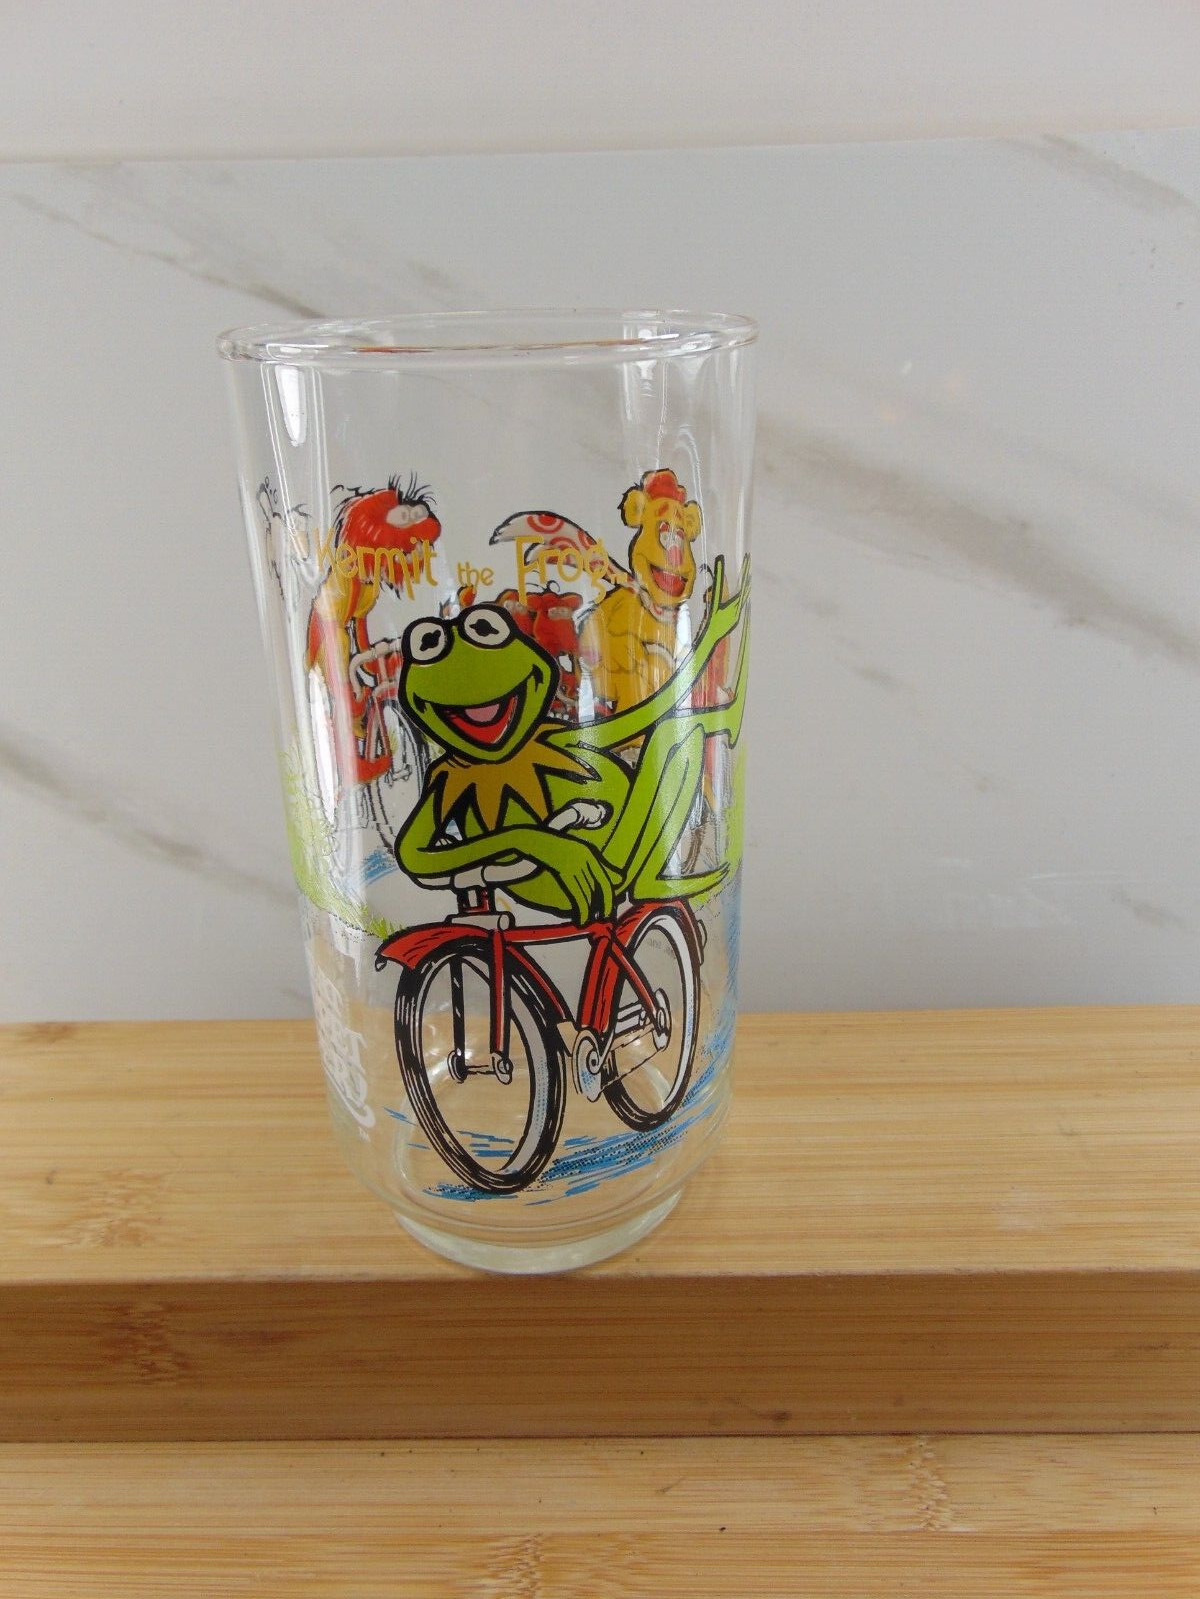 VINTAGE THE GREAT MUPPET CAPER KERMIT THE FROG MCDONALD’S GLASS 1981 MINT